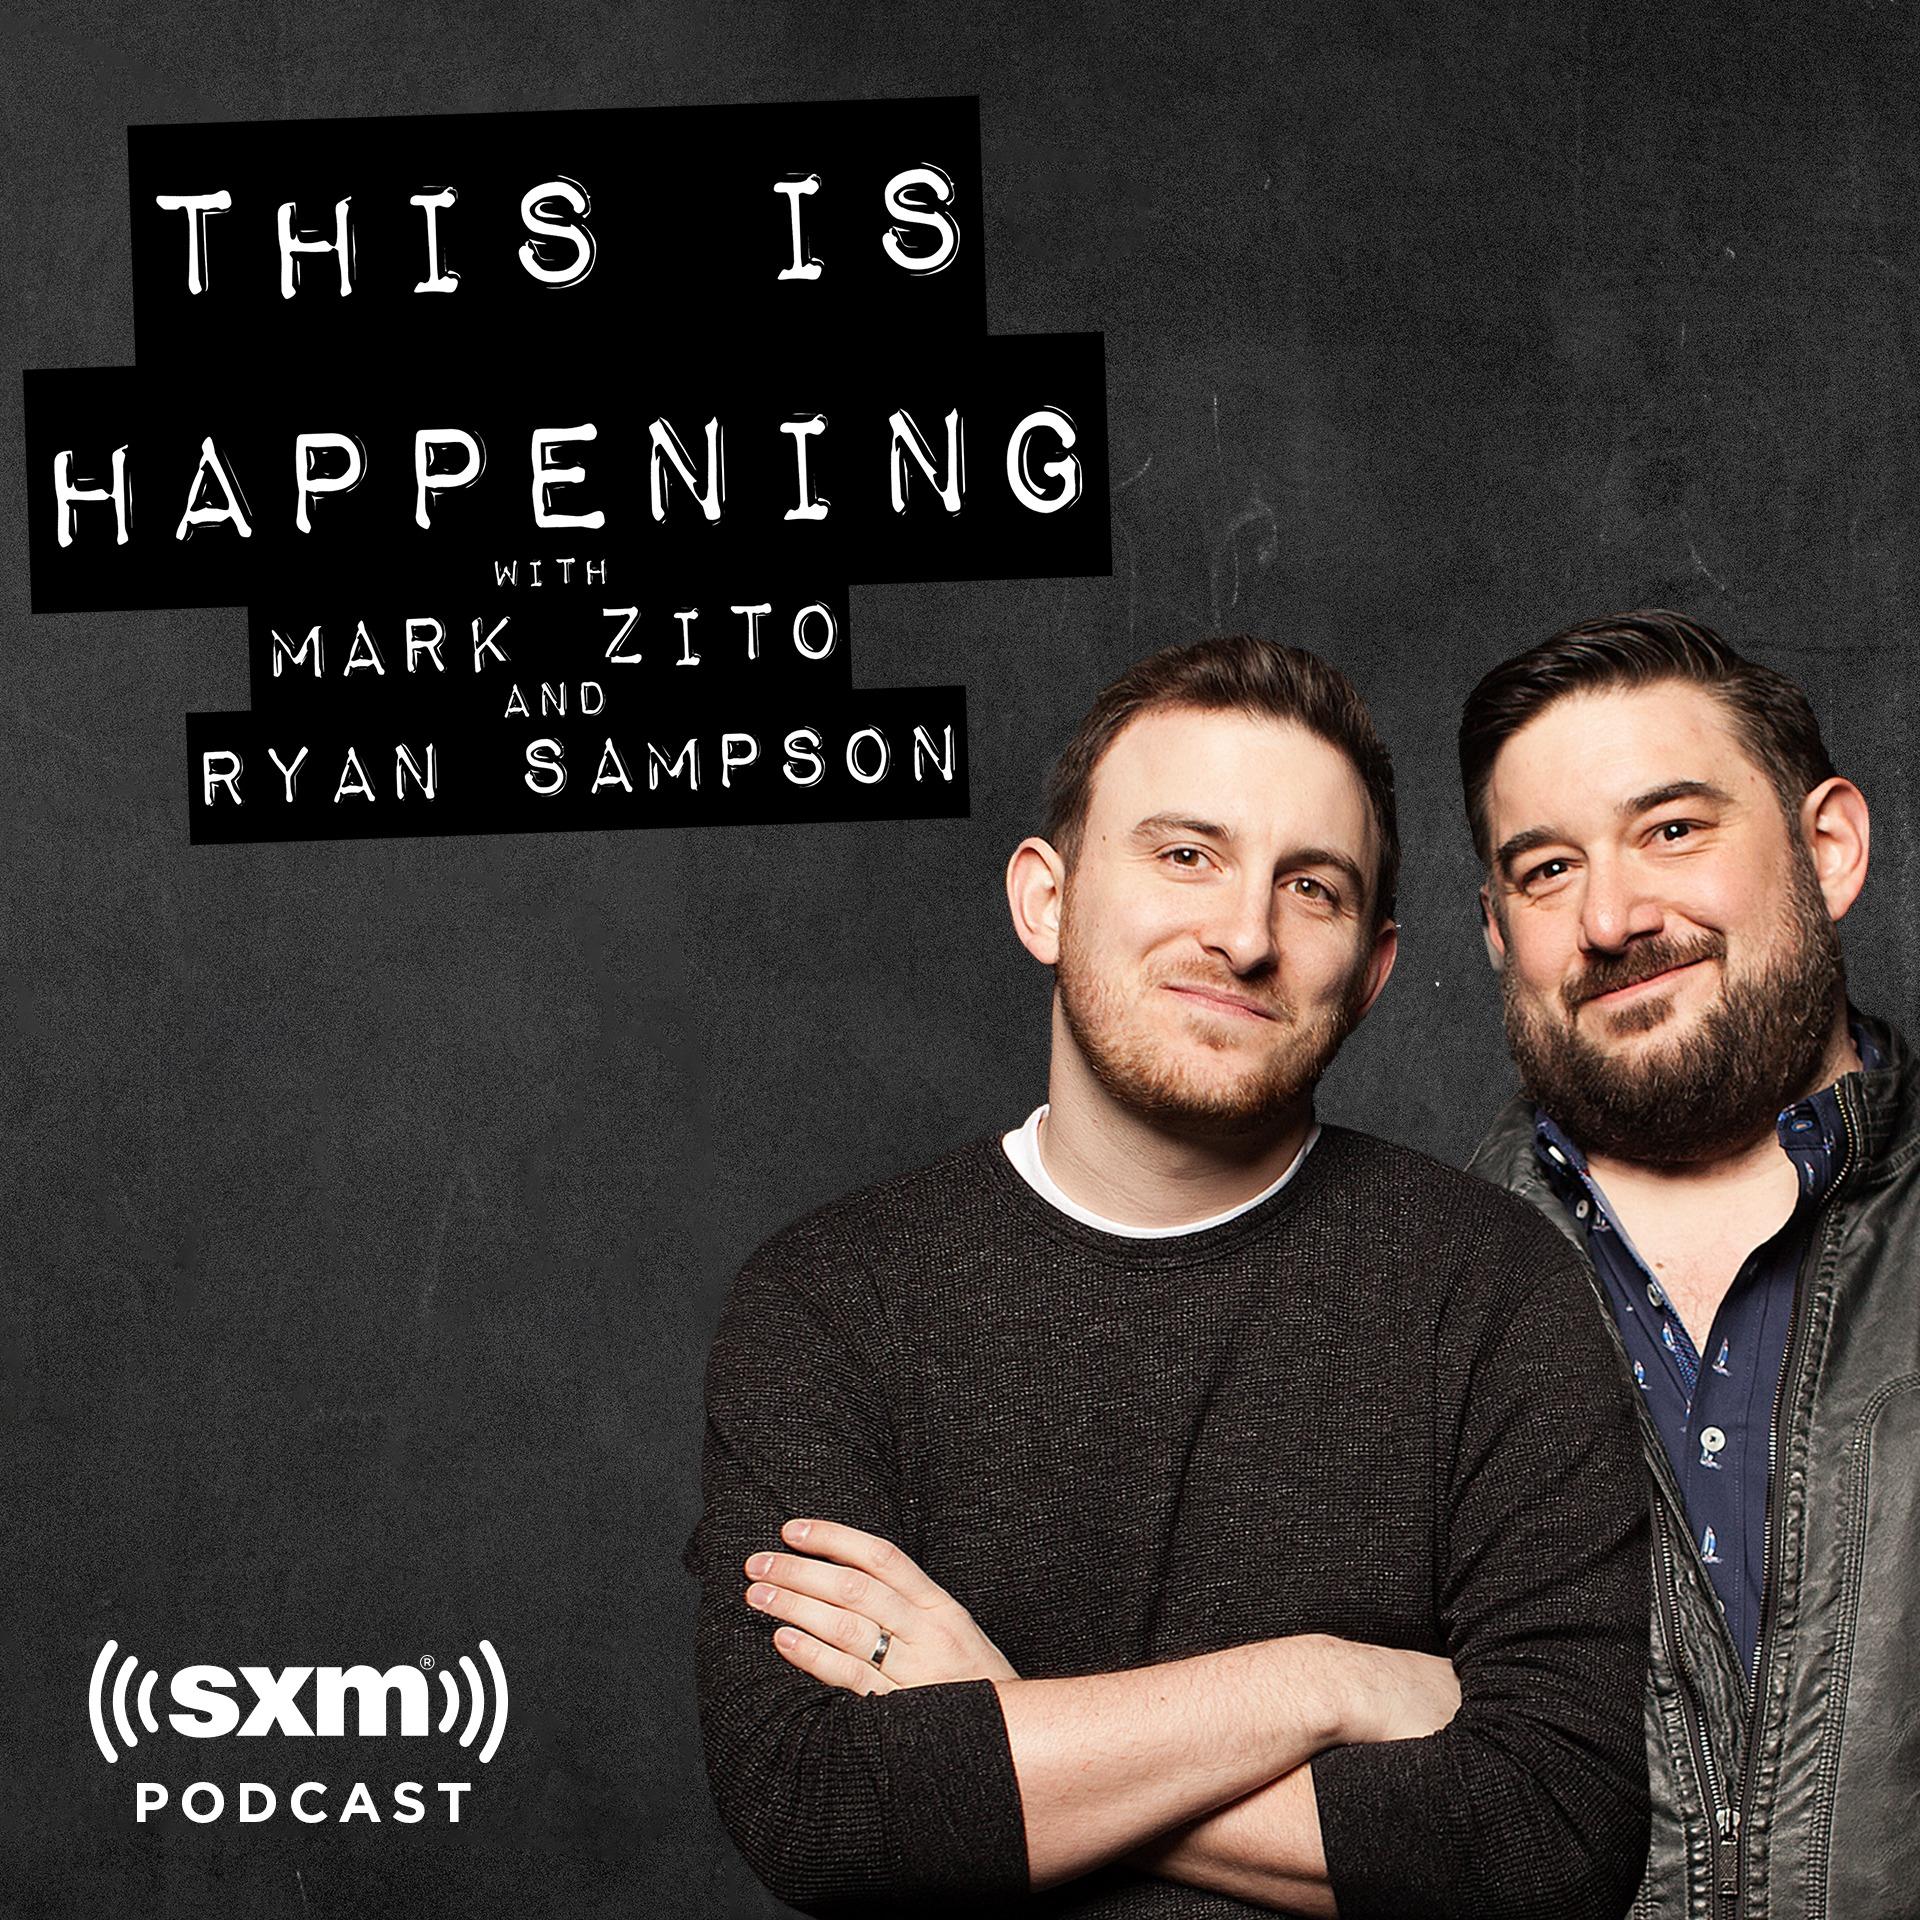 Show poster of This Is Happening with Mark Zito and Ryan Sampson